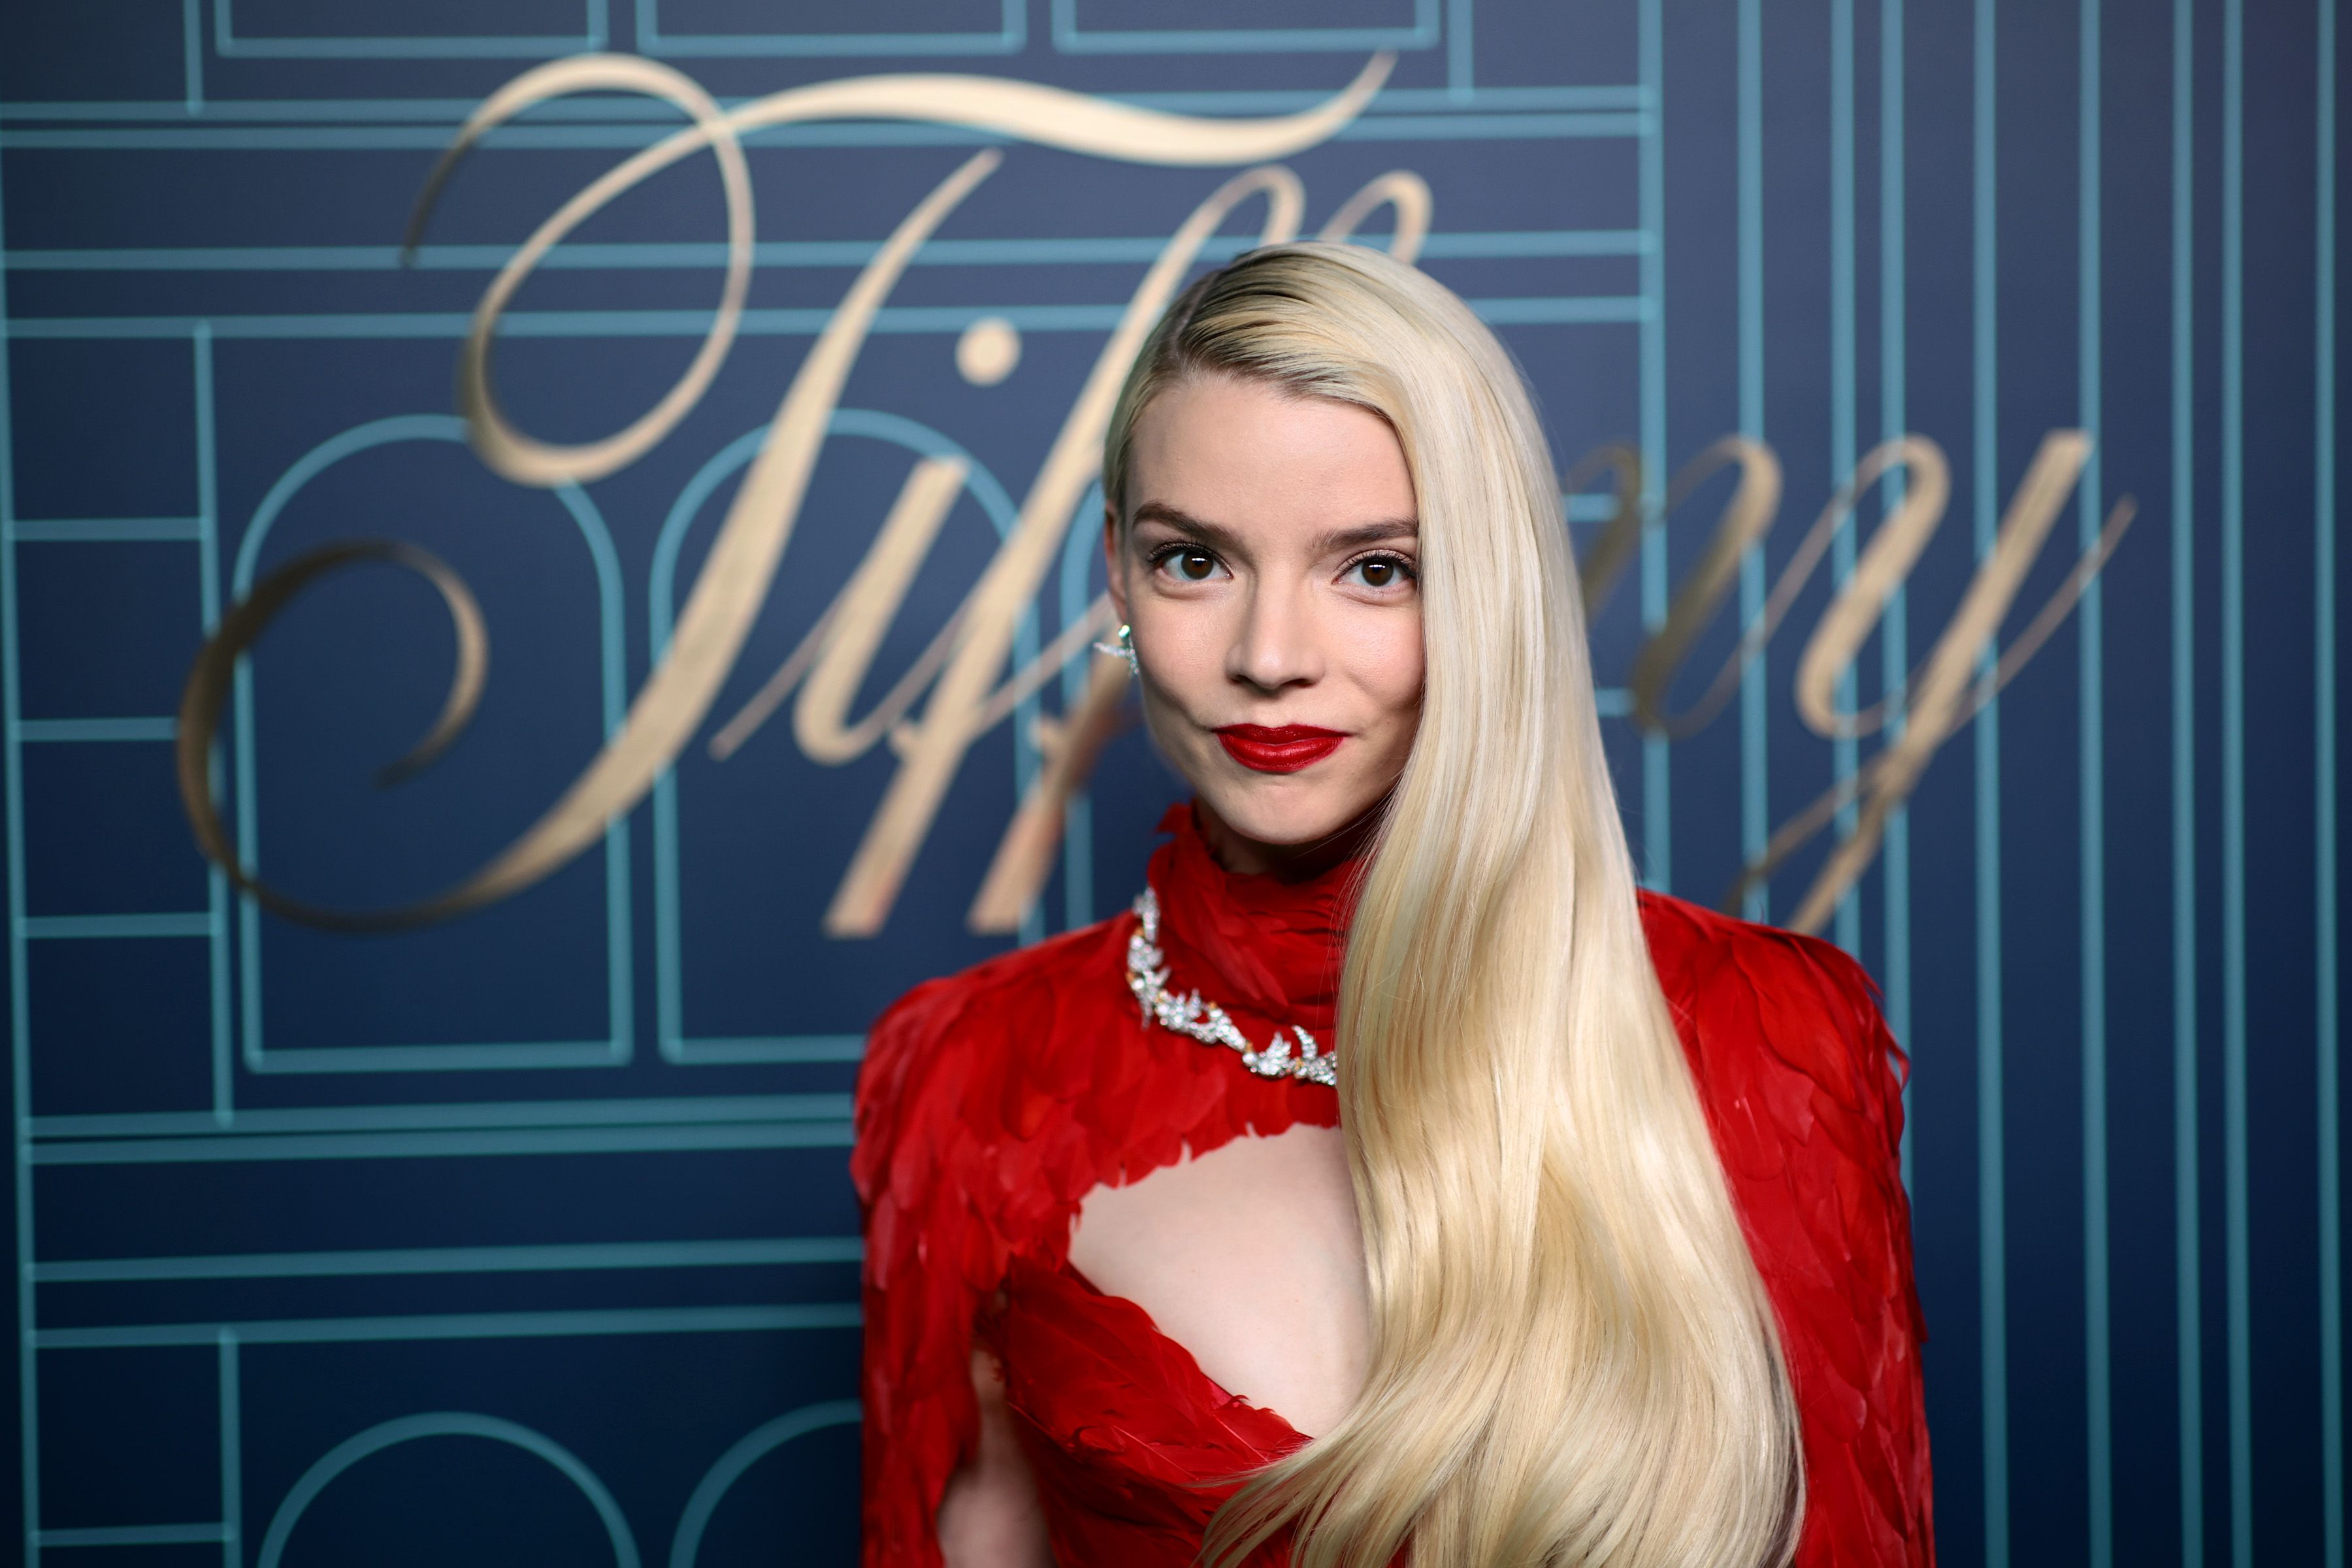 Anya Taylor Joy was made fun of for her looks